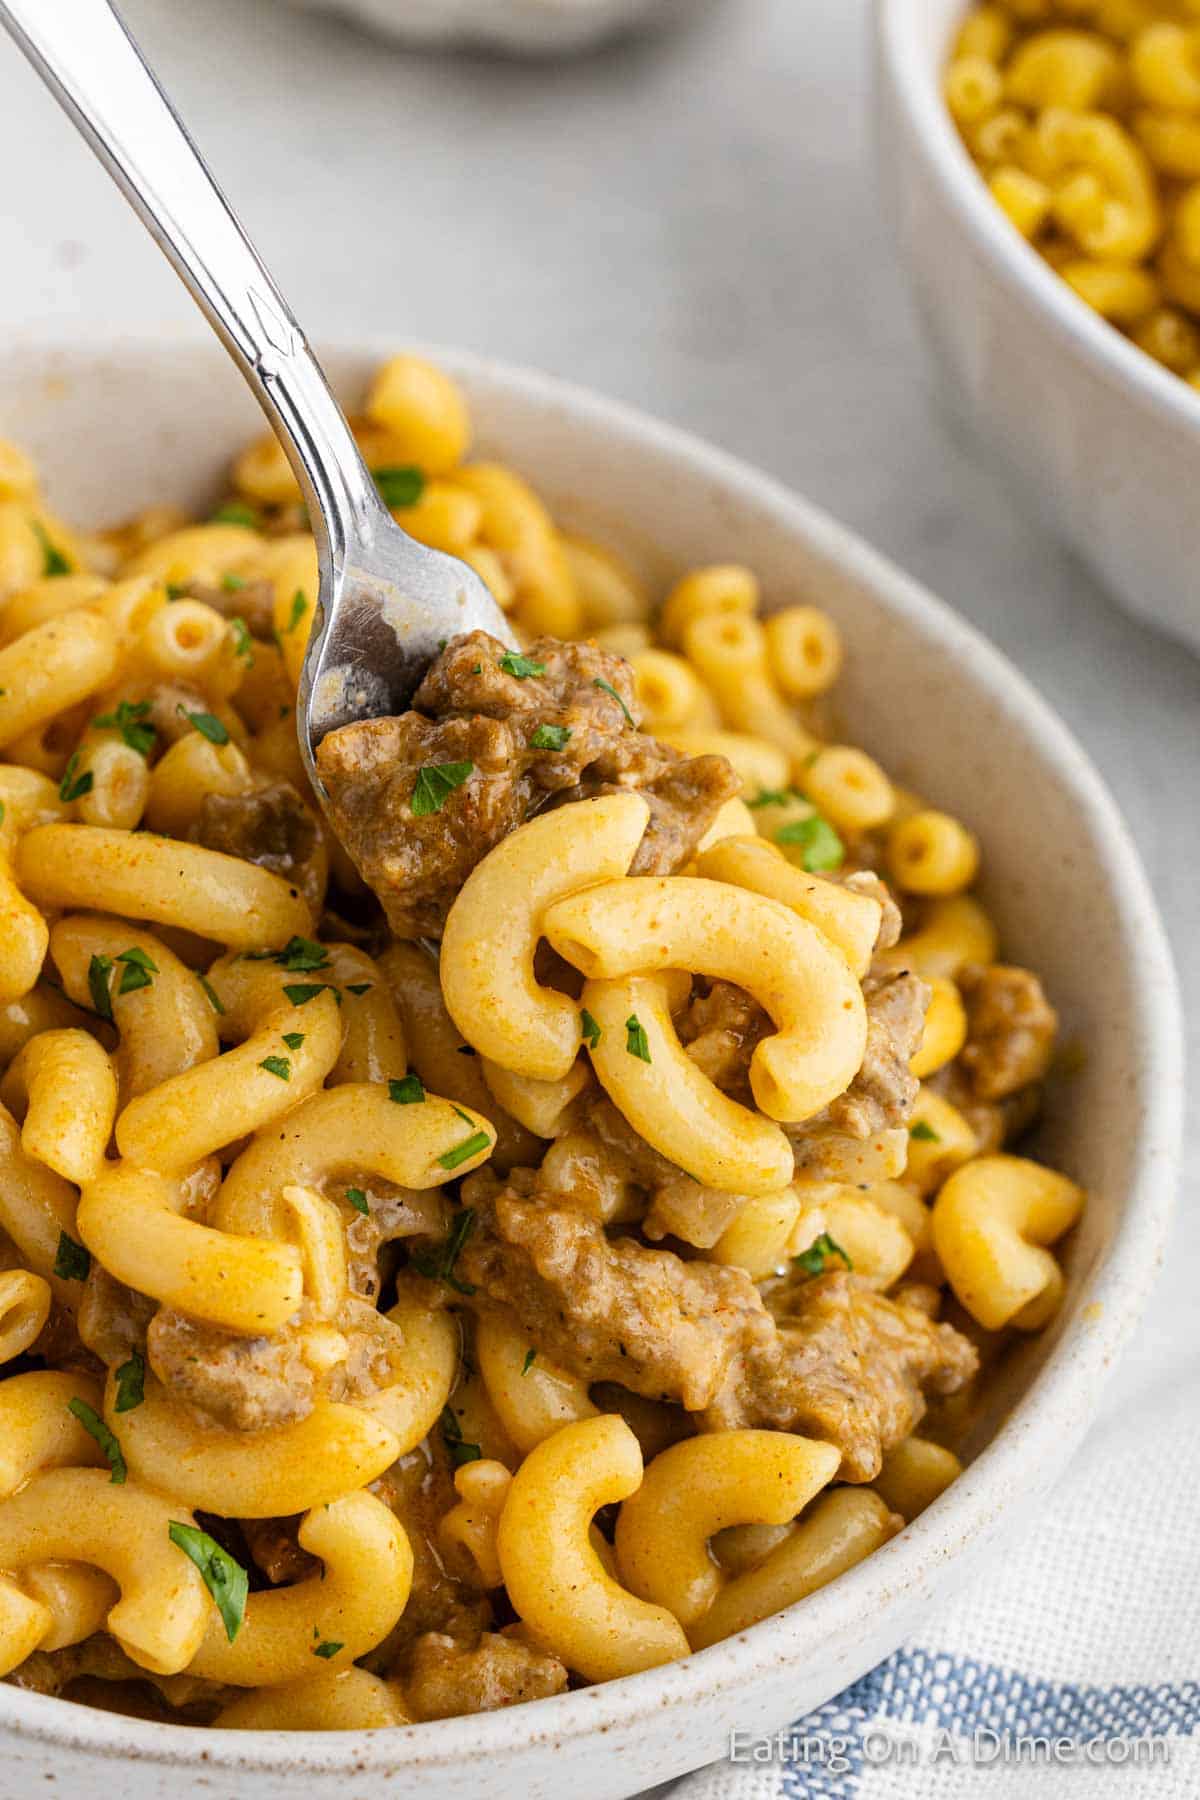 A bowl of creamy macaroni and cheese mixed with ground beef, reminiscent of a homemade Cheeseburger Helper. A fork is lifting a portion of the pasta, showcasing the saucy, savory mixture. The dish is garnished with finely chopped parsley. In the background, a side bowl of corn is visible.